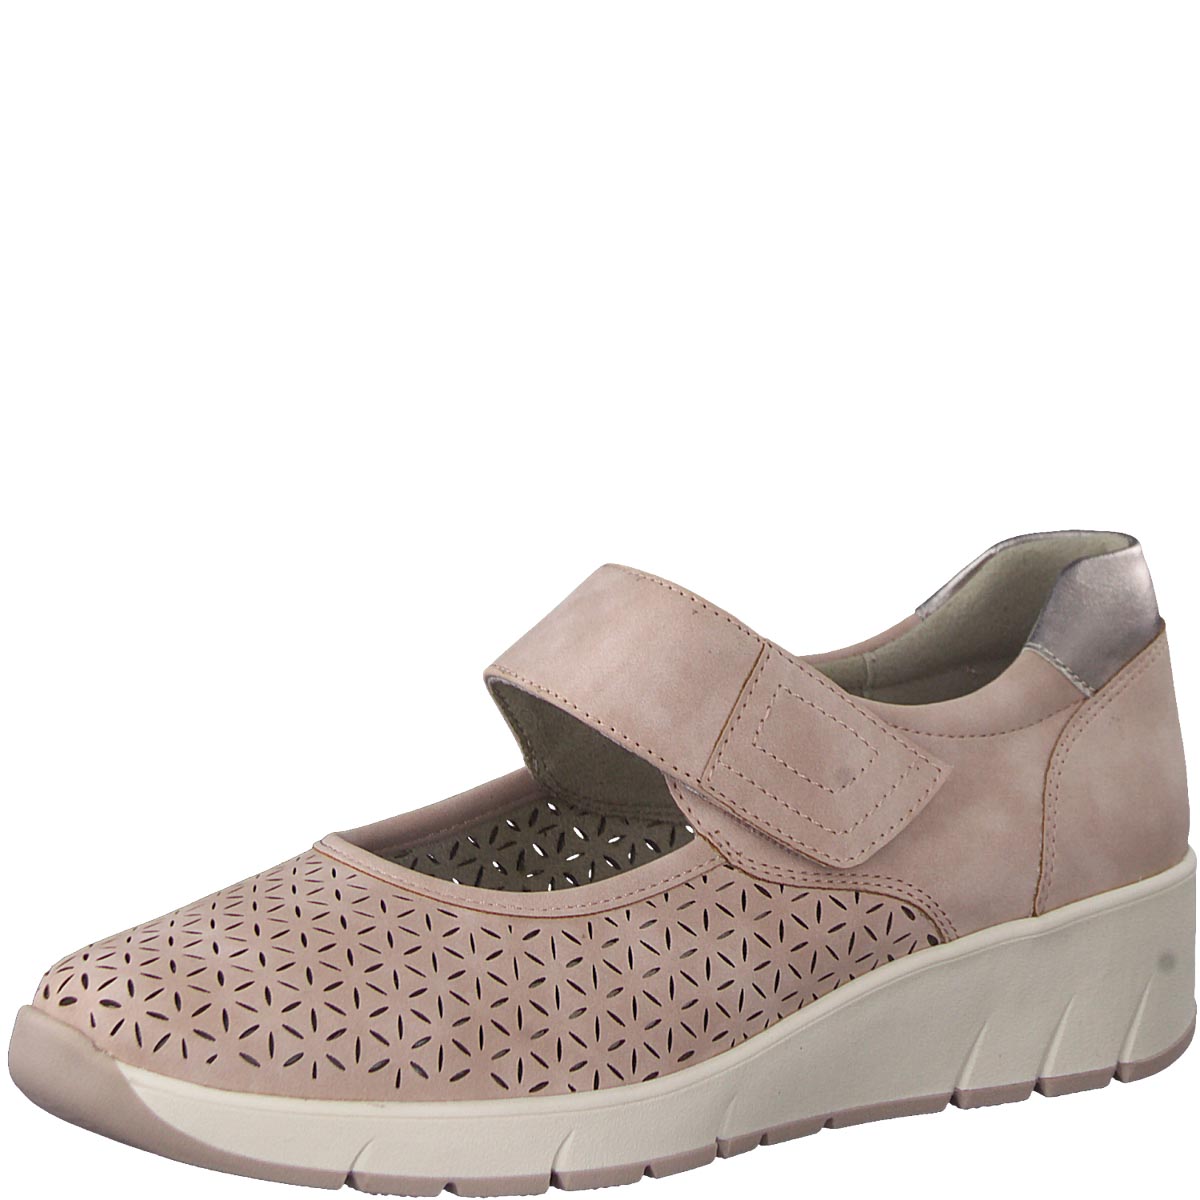 Front view of Jana Soft Pink Shoe with rose gold accents.